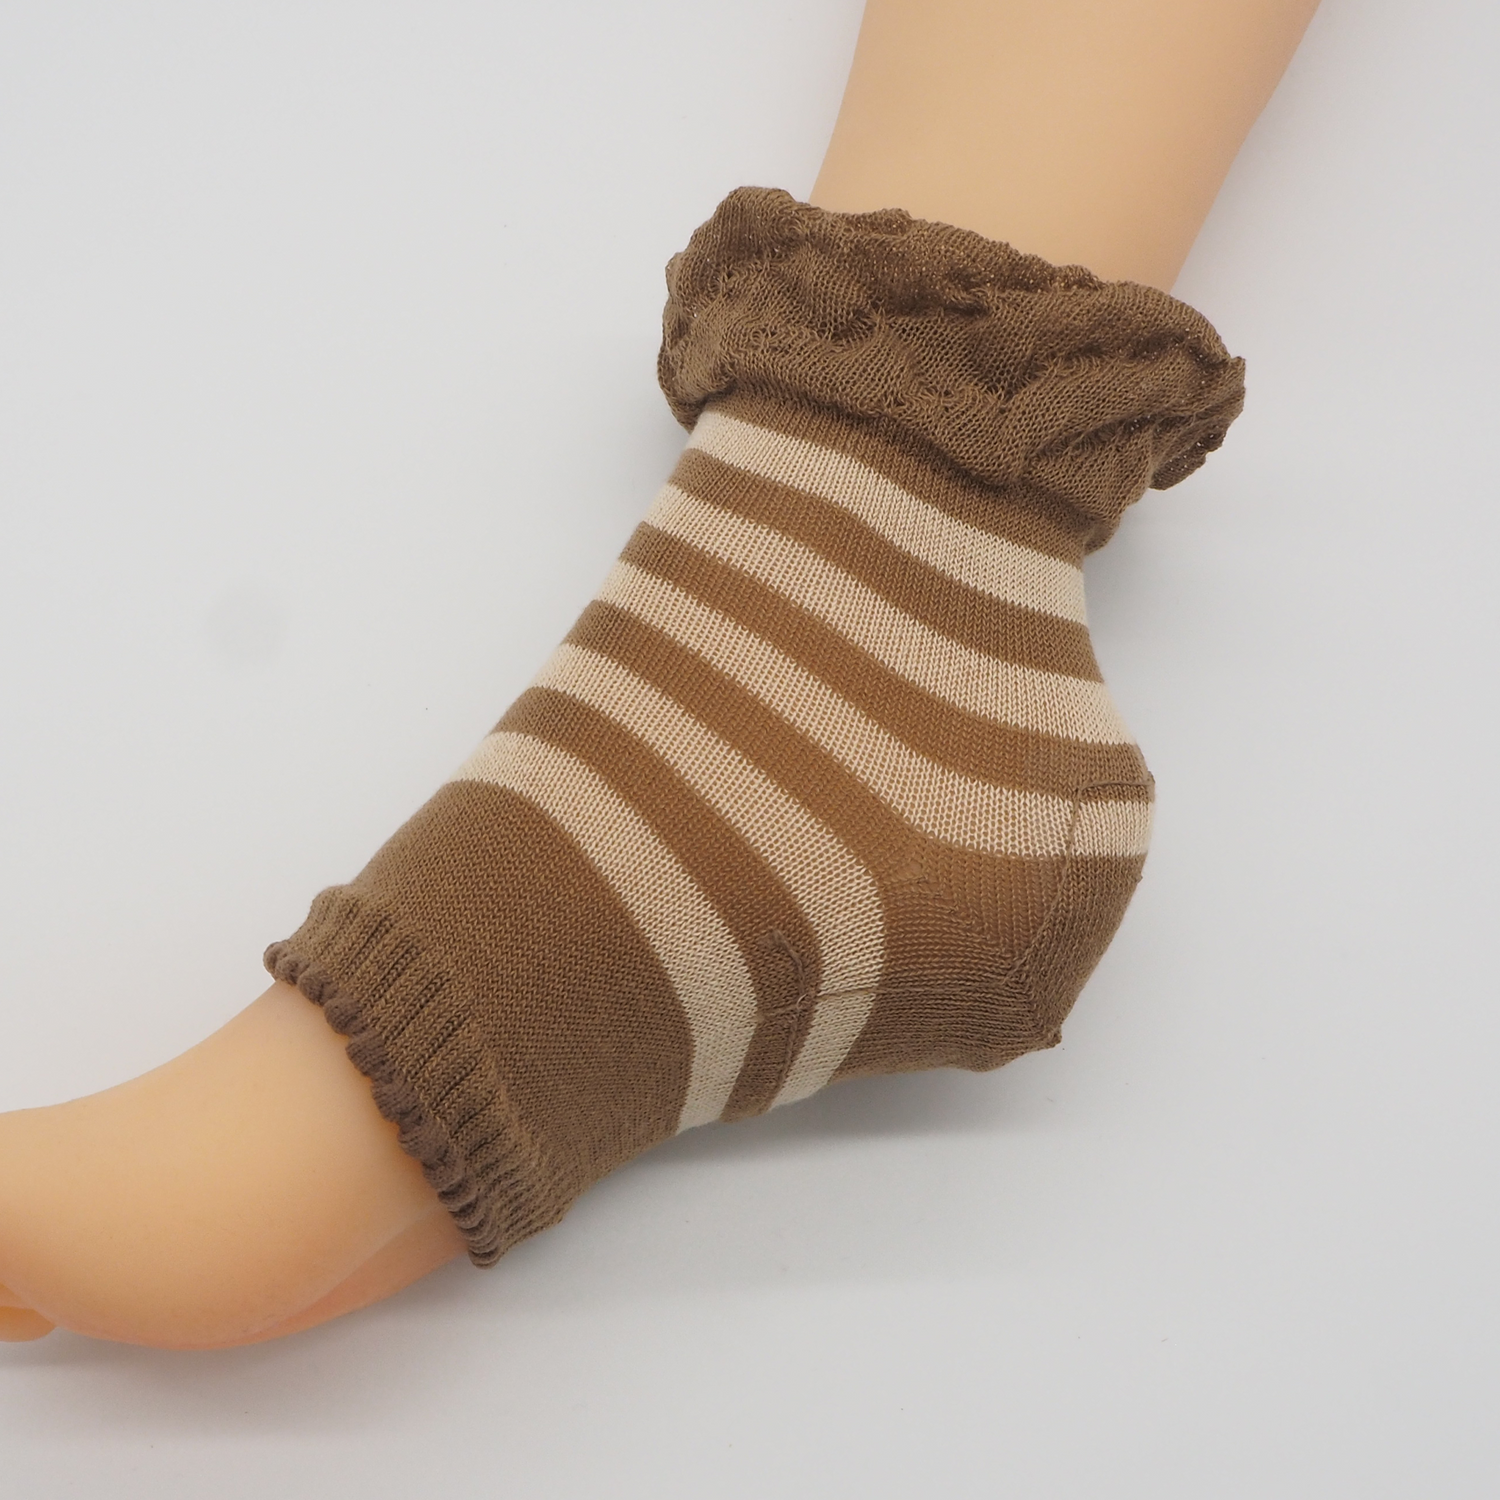 Heel-Smoothing Socks for bed - 842